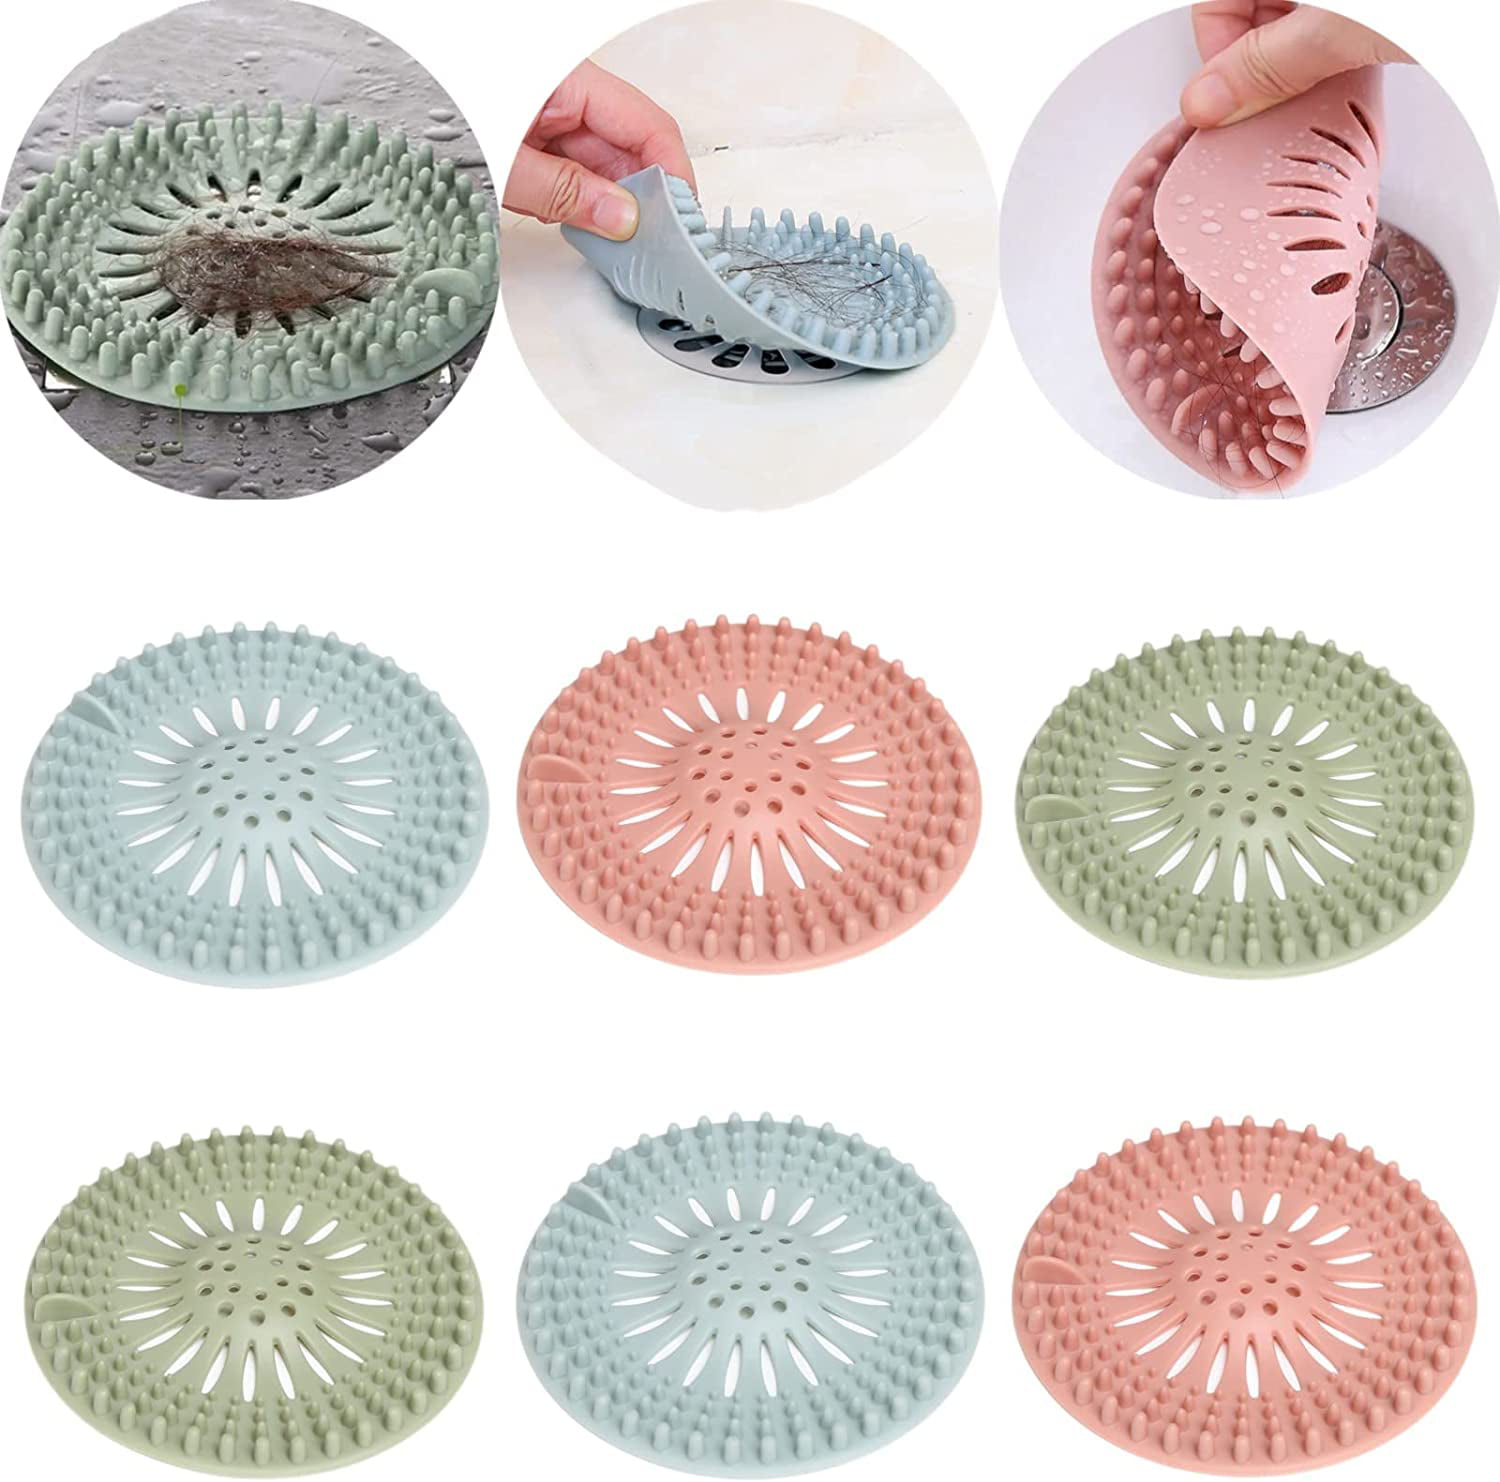  Hair Catcher Shower Drain(3 Pack), Bathtub Drain Cover, Sink  Tub Drain Stopper, Sink Strainer for Kitchen and Bathroom, Hair Stopper for  Bathtub Drain Cover Size from 2.13'' to 4.5''. : Tools